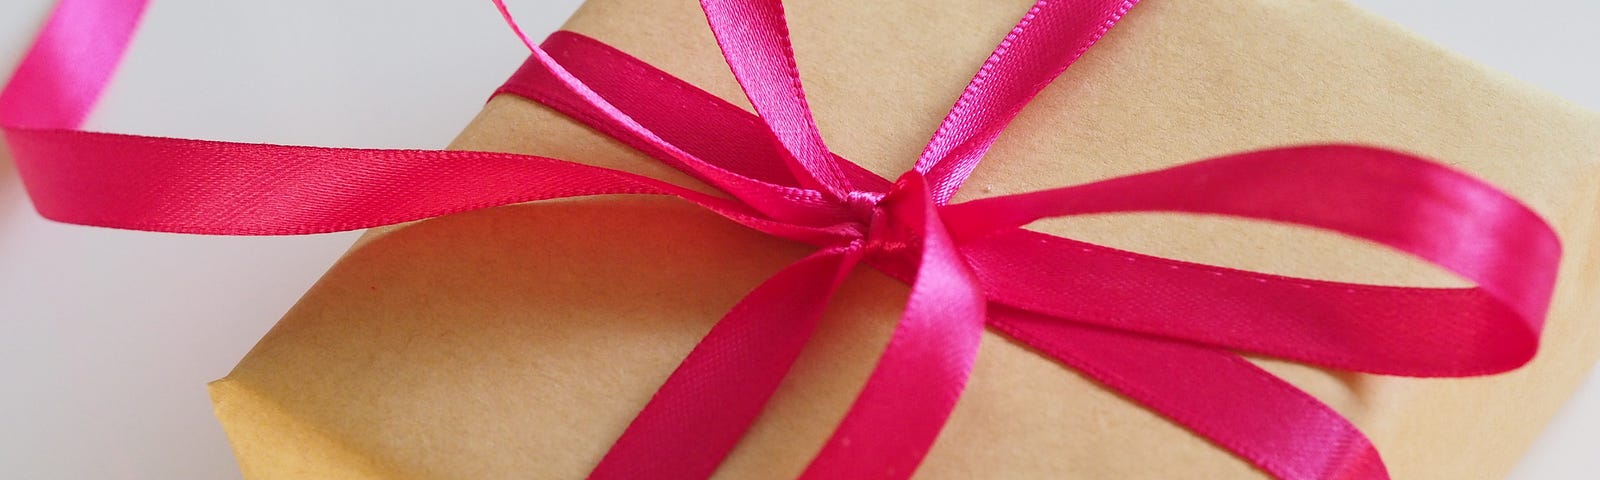 A gift box wrapped in brown paper and tied with a bright red ribbon